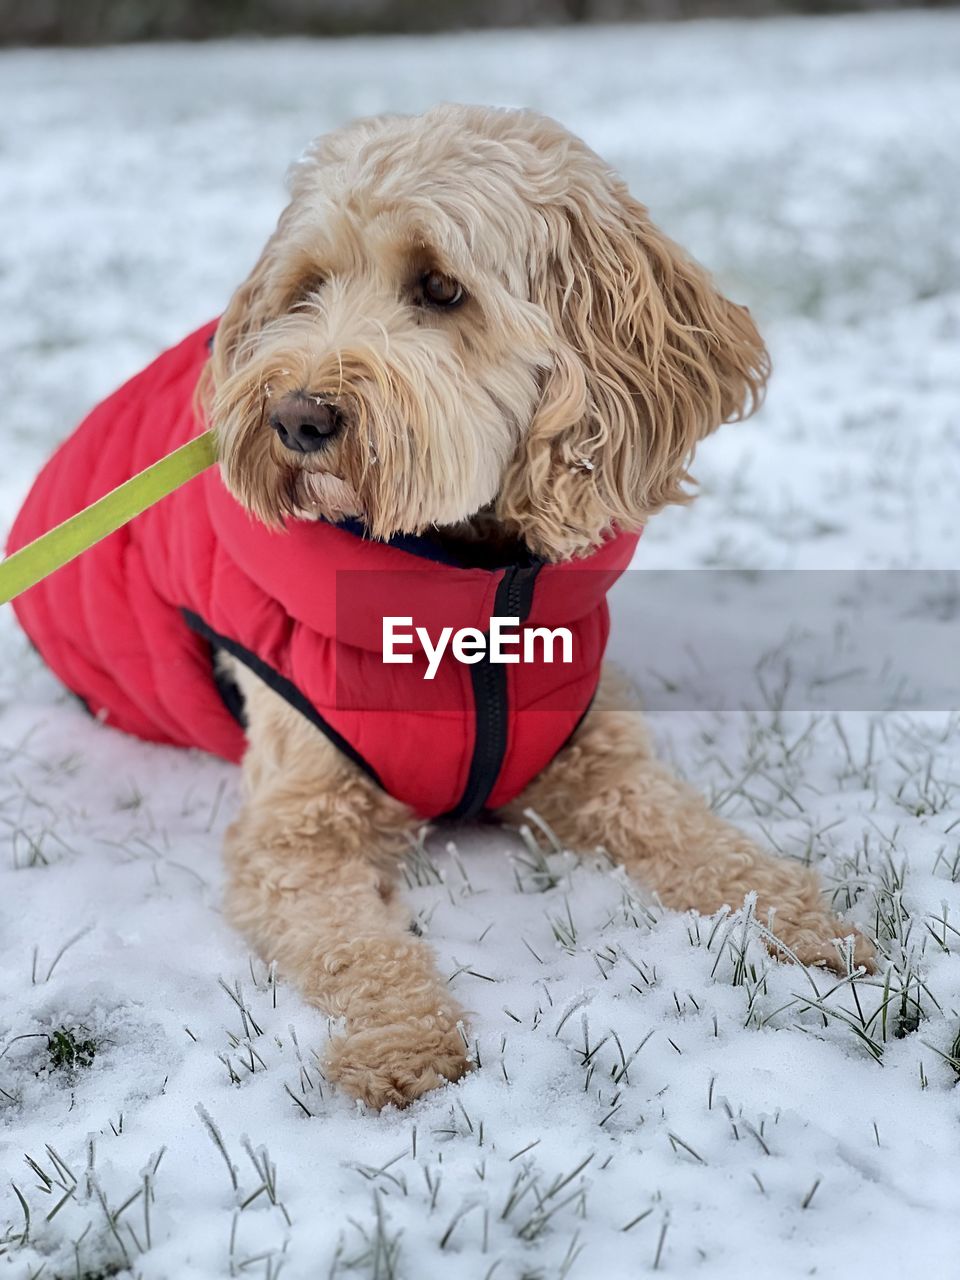 canine, dog, pet, domestic animals, one animal, mammal, animal themes, animal, winter, snow, cold temperature, clothing, pet clothing, nature, portrait, cockapoo, cute, no people, animal hair, fun